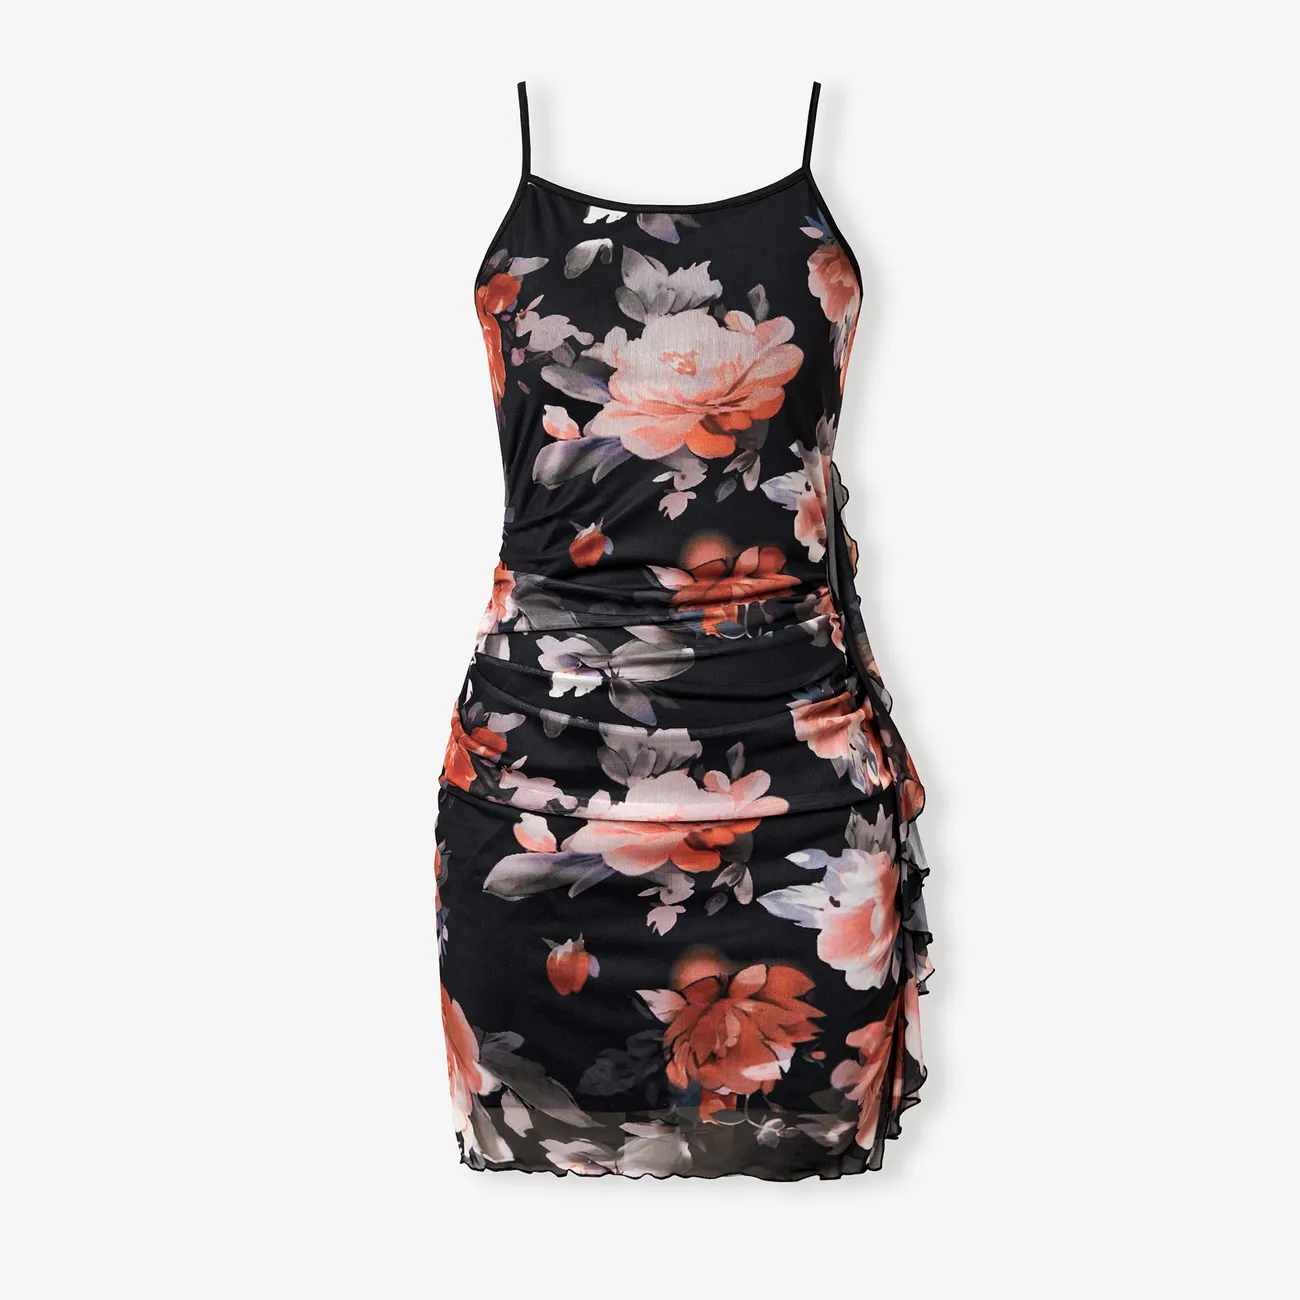 Mommy and Me Vintage Floral Mesh Bodycon Strap Dress with Ruffle Accents Side Black big image 1